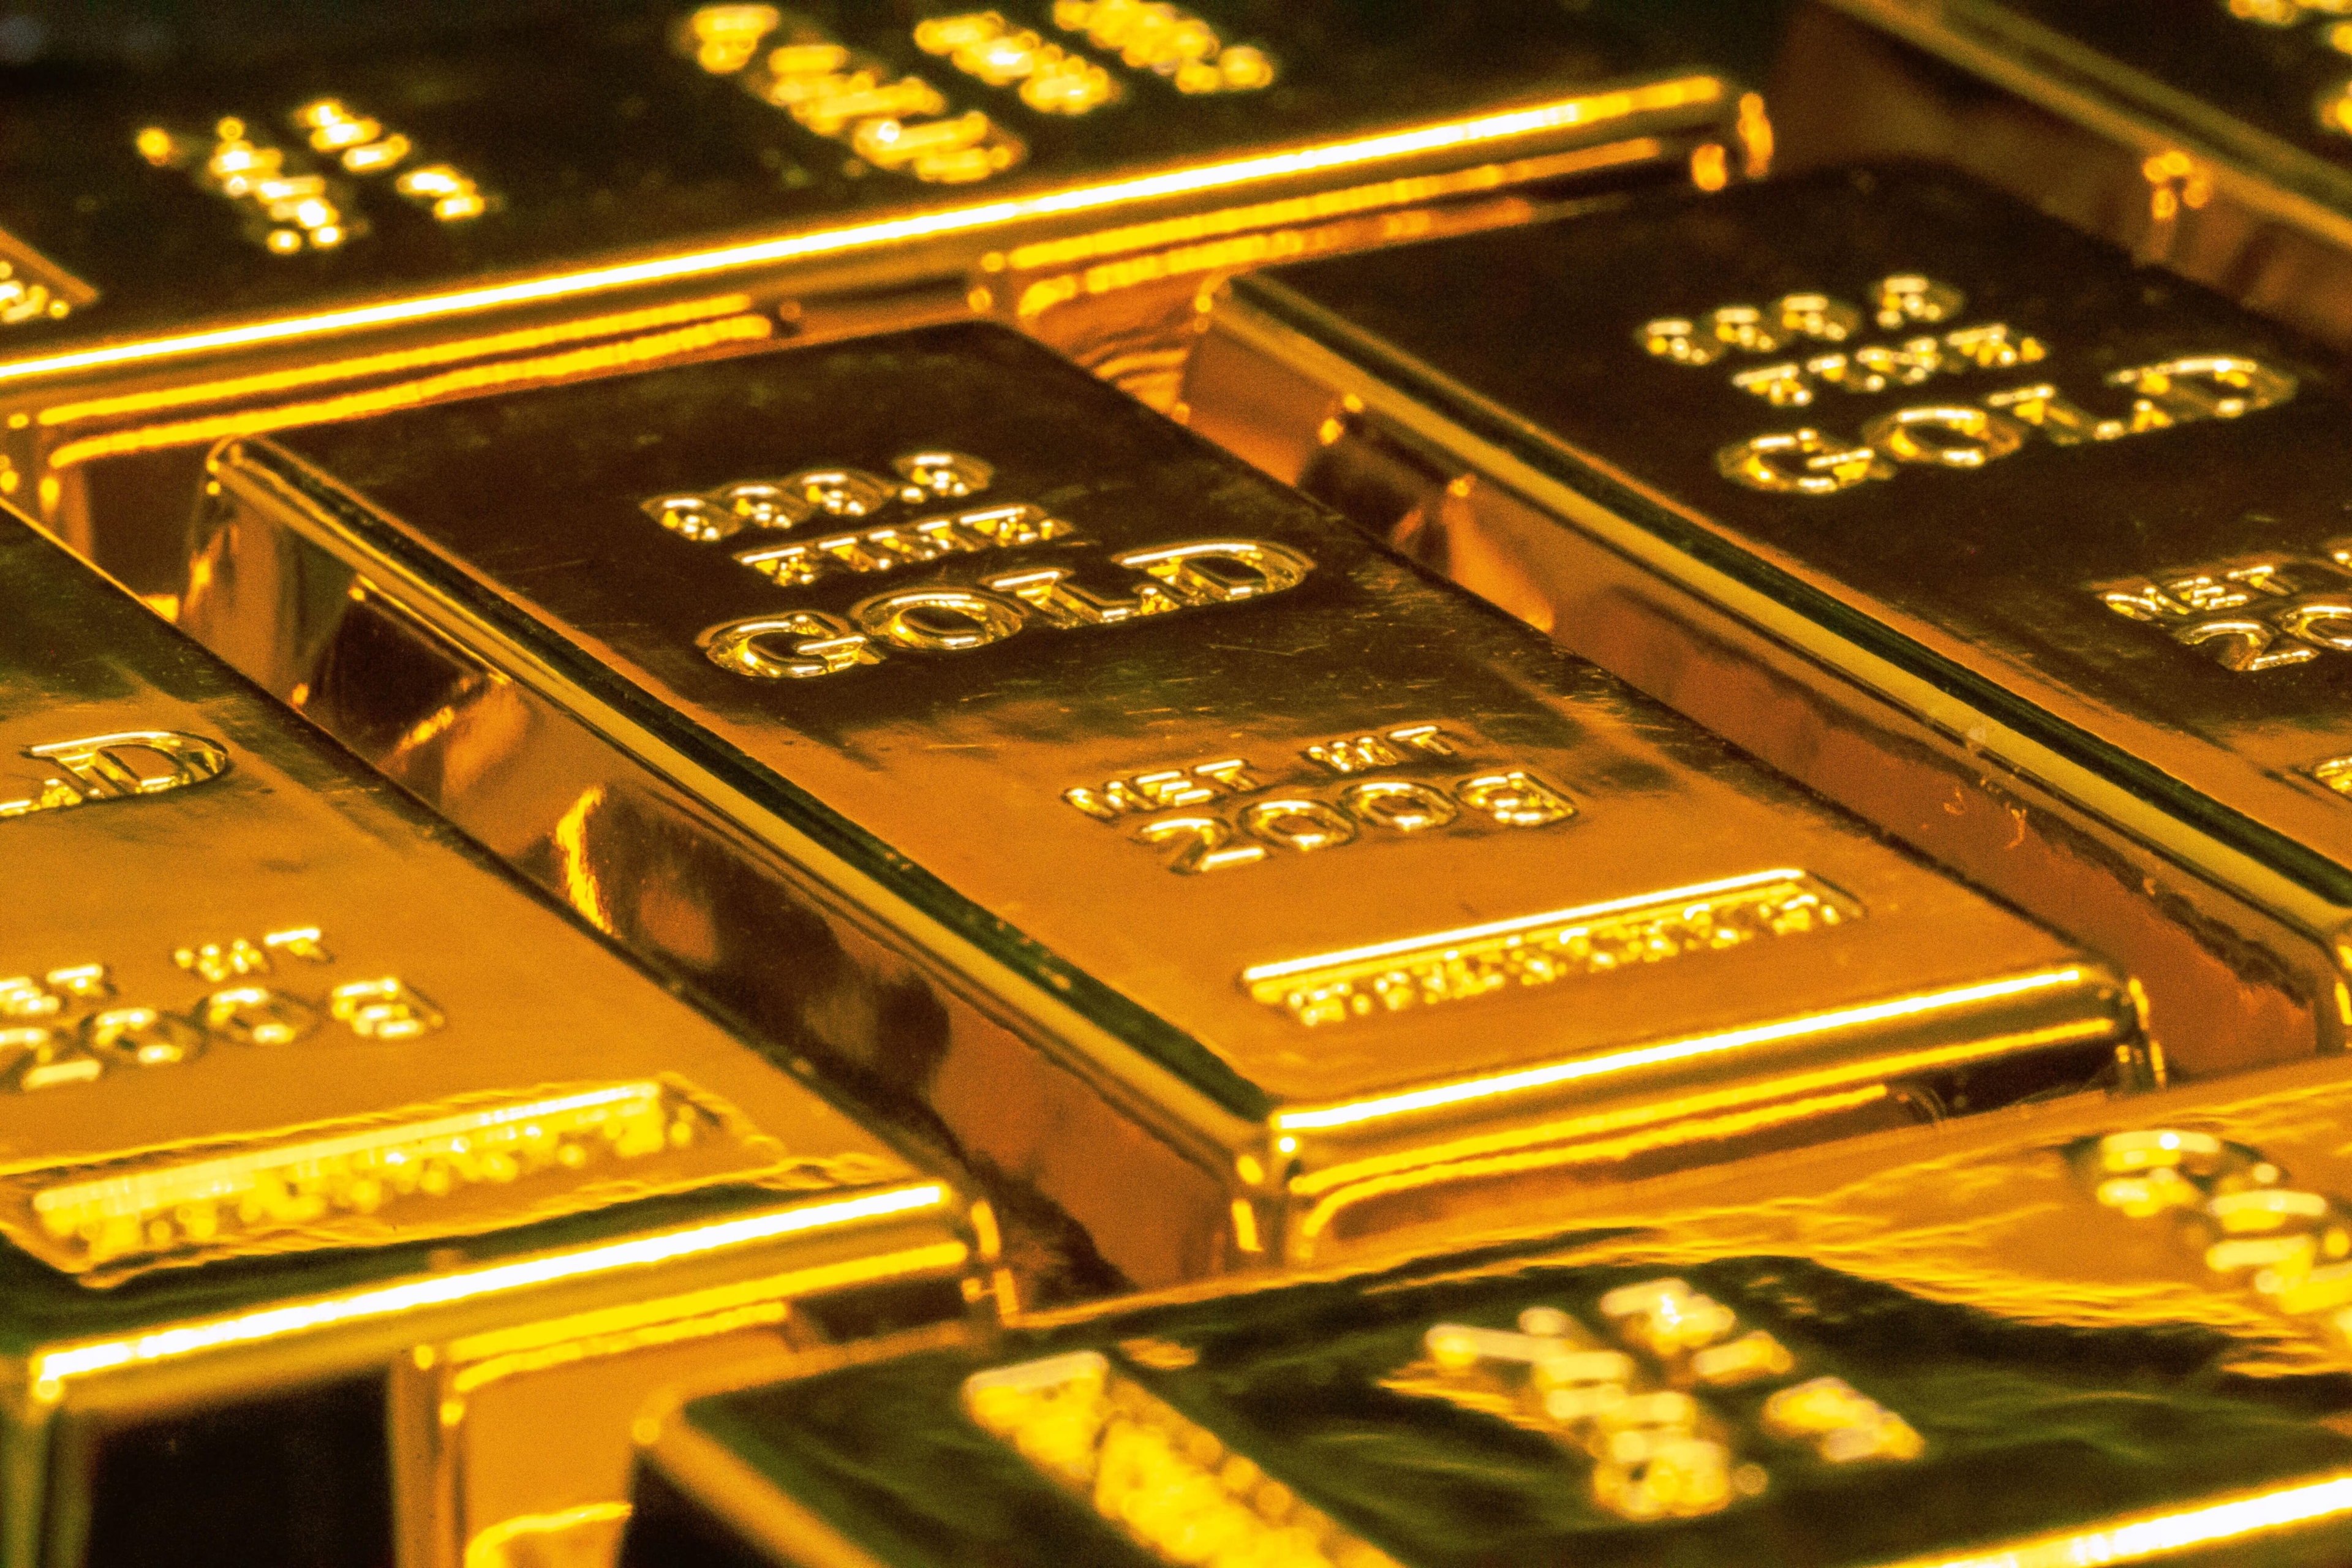 Gold prices recovered on April 4 amid recession fears. However, the gains were capped by strength in the dollar and rise in the global equity market. Gold June futures contract settled at $1934 per troy ounce with a gain of 0.53 percent.